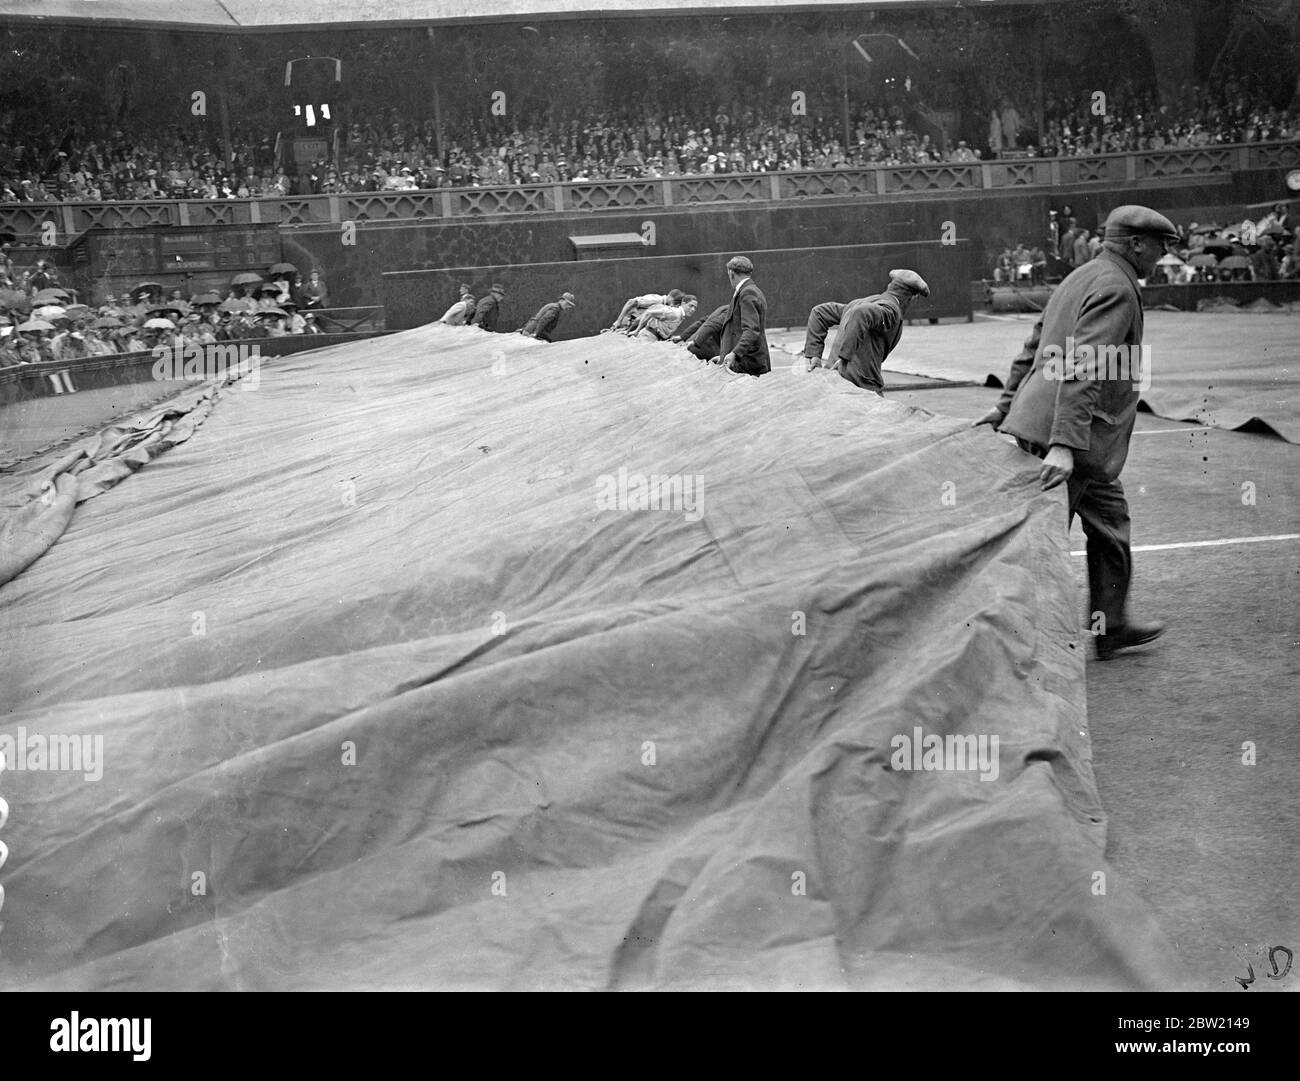 For the first time since the championships commenced, rain stopped play on the Central Court at Wimbledon, during the match between Fru Sperling, the Danish favourite for the women's title, and Miss Alice Marble, the American women's champion. Covering the Centre Court against the rain. 29 June 1937 Stock Photo